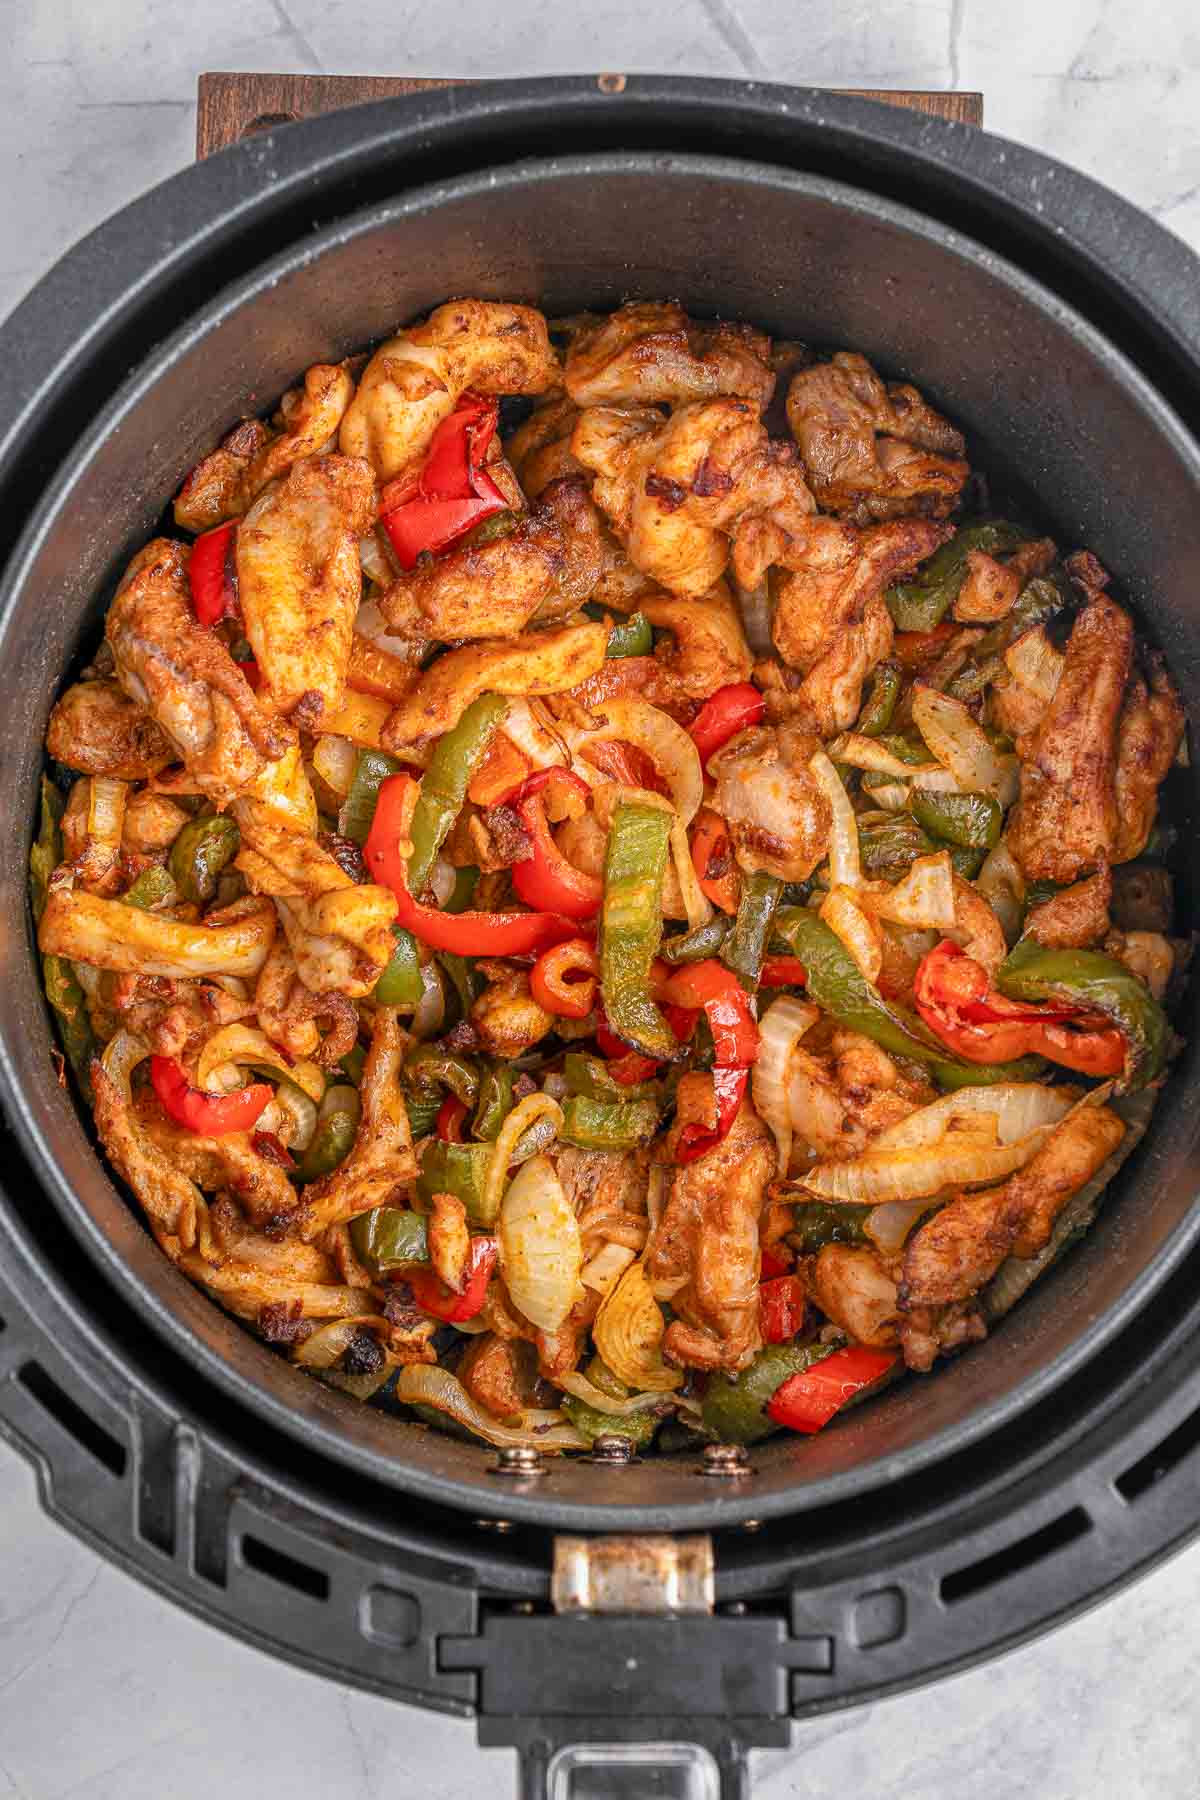 An air fryer filled with chicken fajitas with red and green peppers.